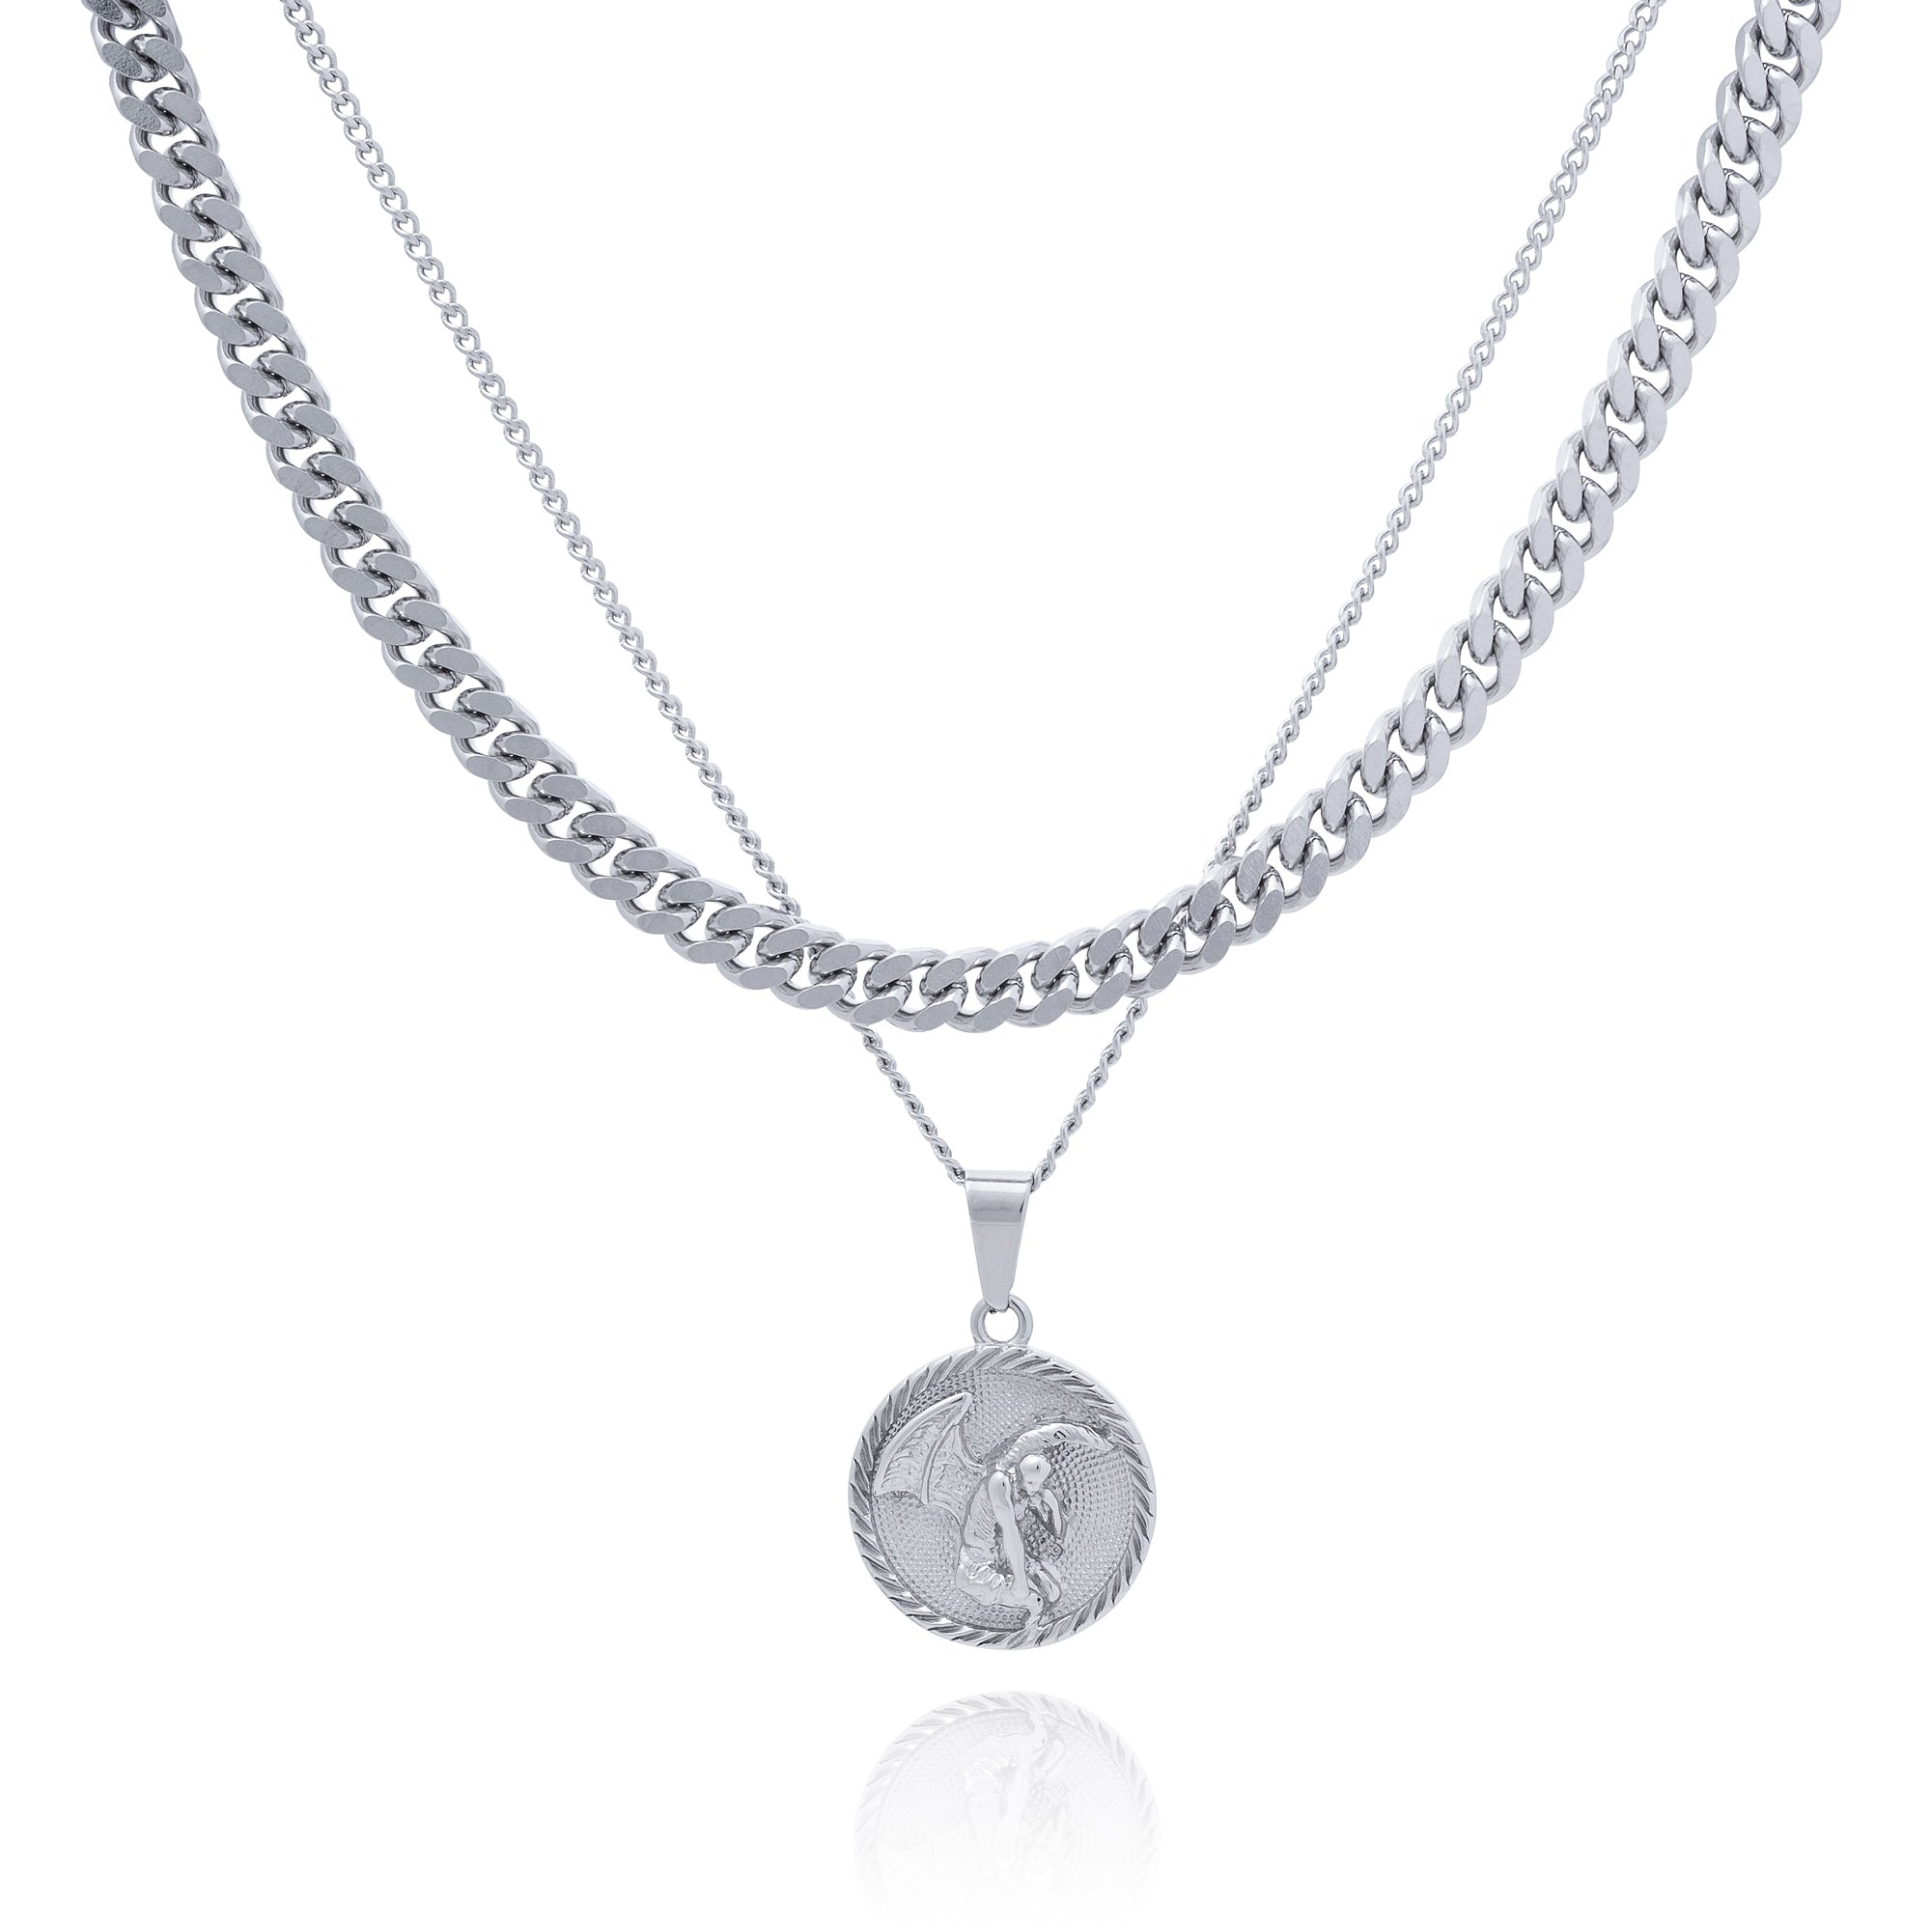 Cuban Link Chain with silver medallion pendant